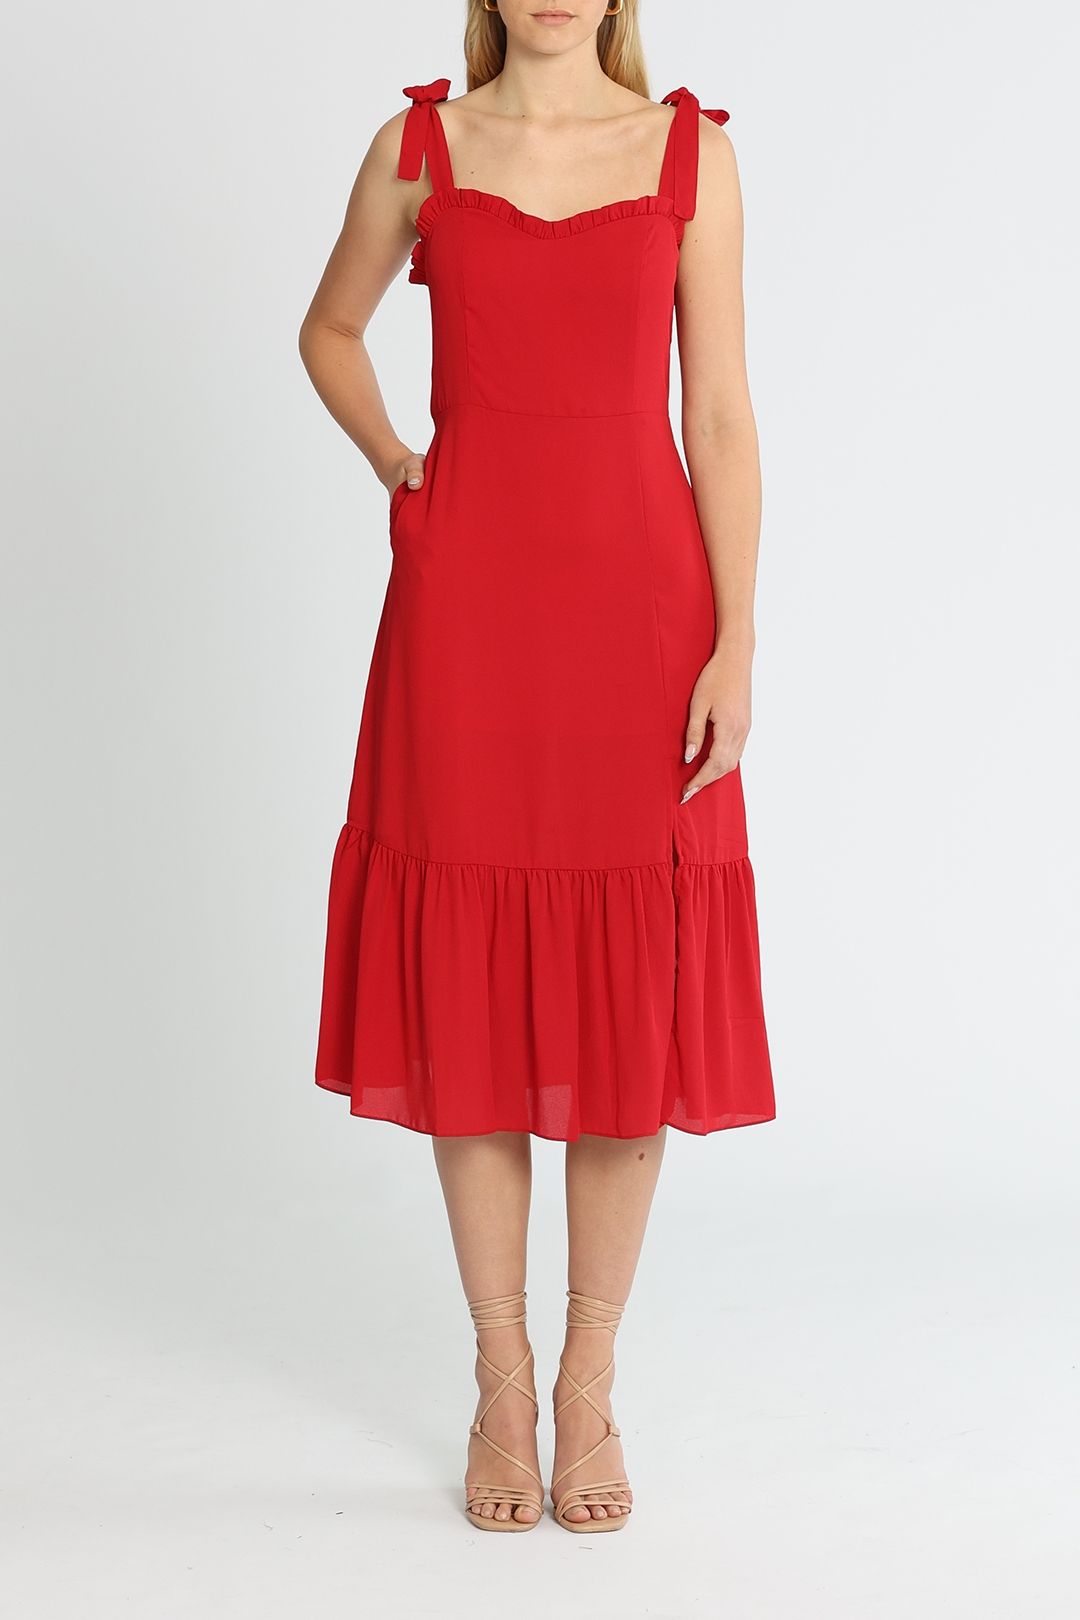 Belle and Bloom Summer Storm Midi Dress Red